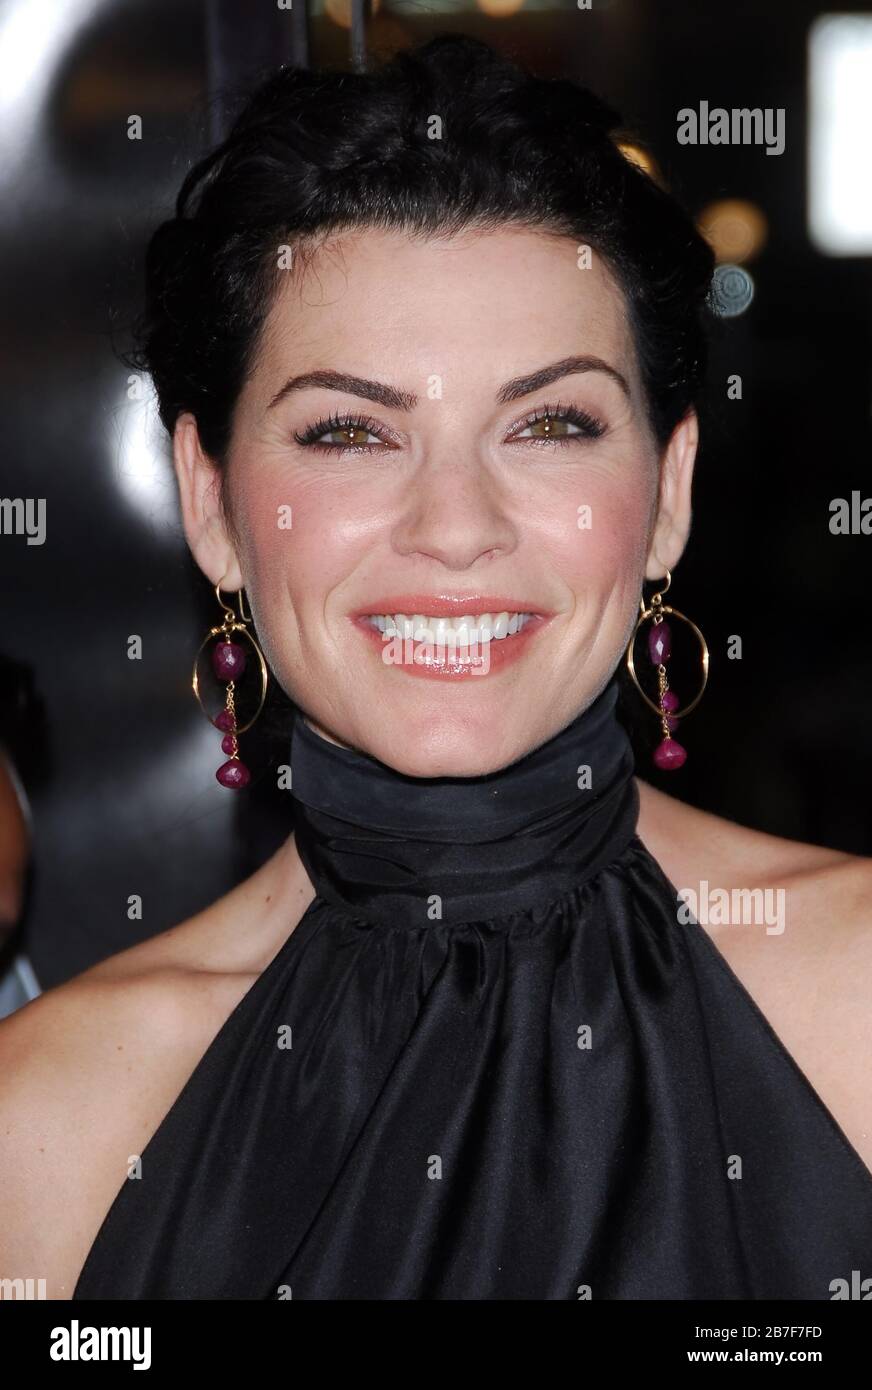 Julianna Margulies at the Los Angeles Premiere of 'Snakes On A Plane' held at the Grauman's Chinese Theater in Hollywood, CA. The event took place on Thursday, August 17, 2006.  Photo by: SBM / PictureLux Stock Photo